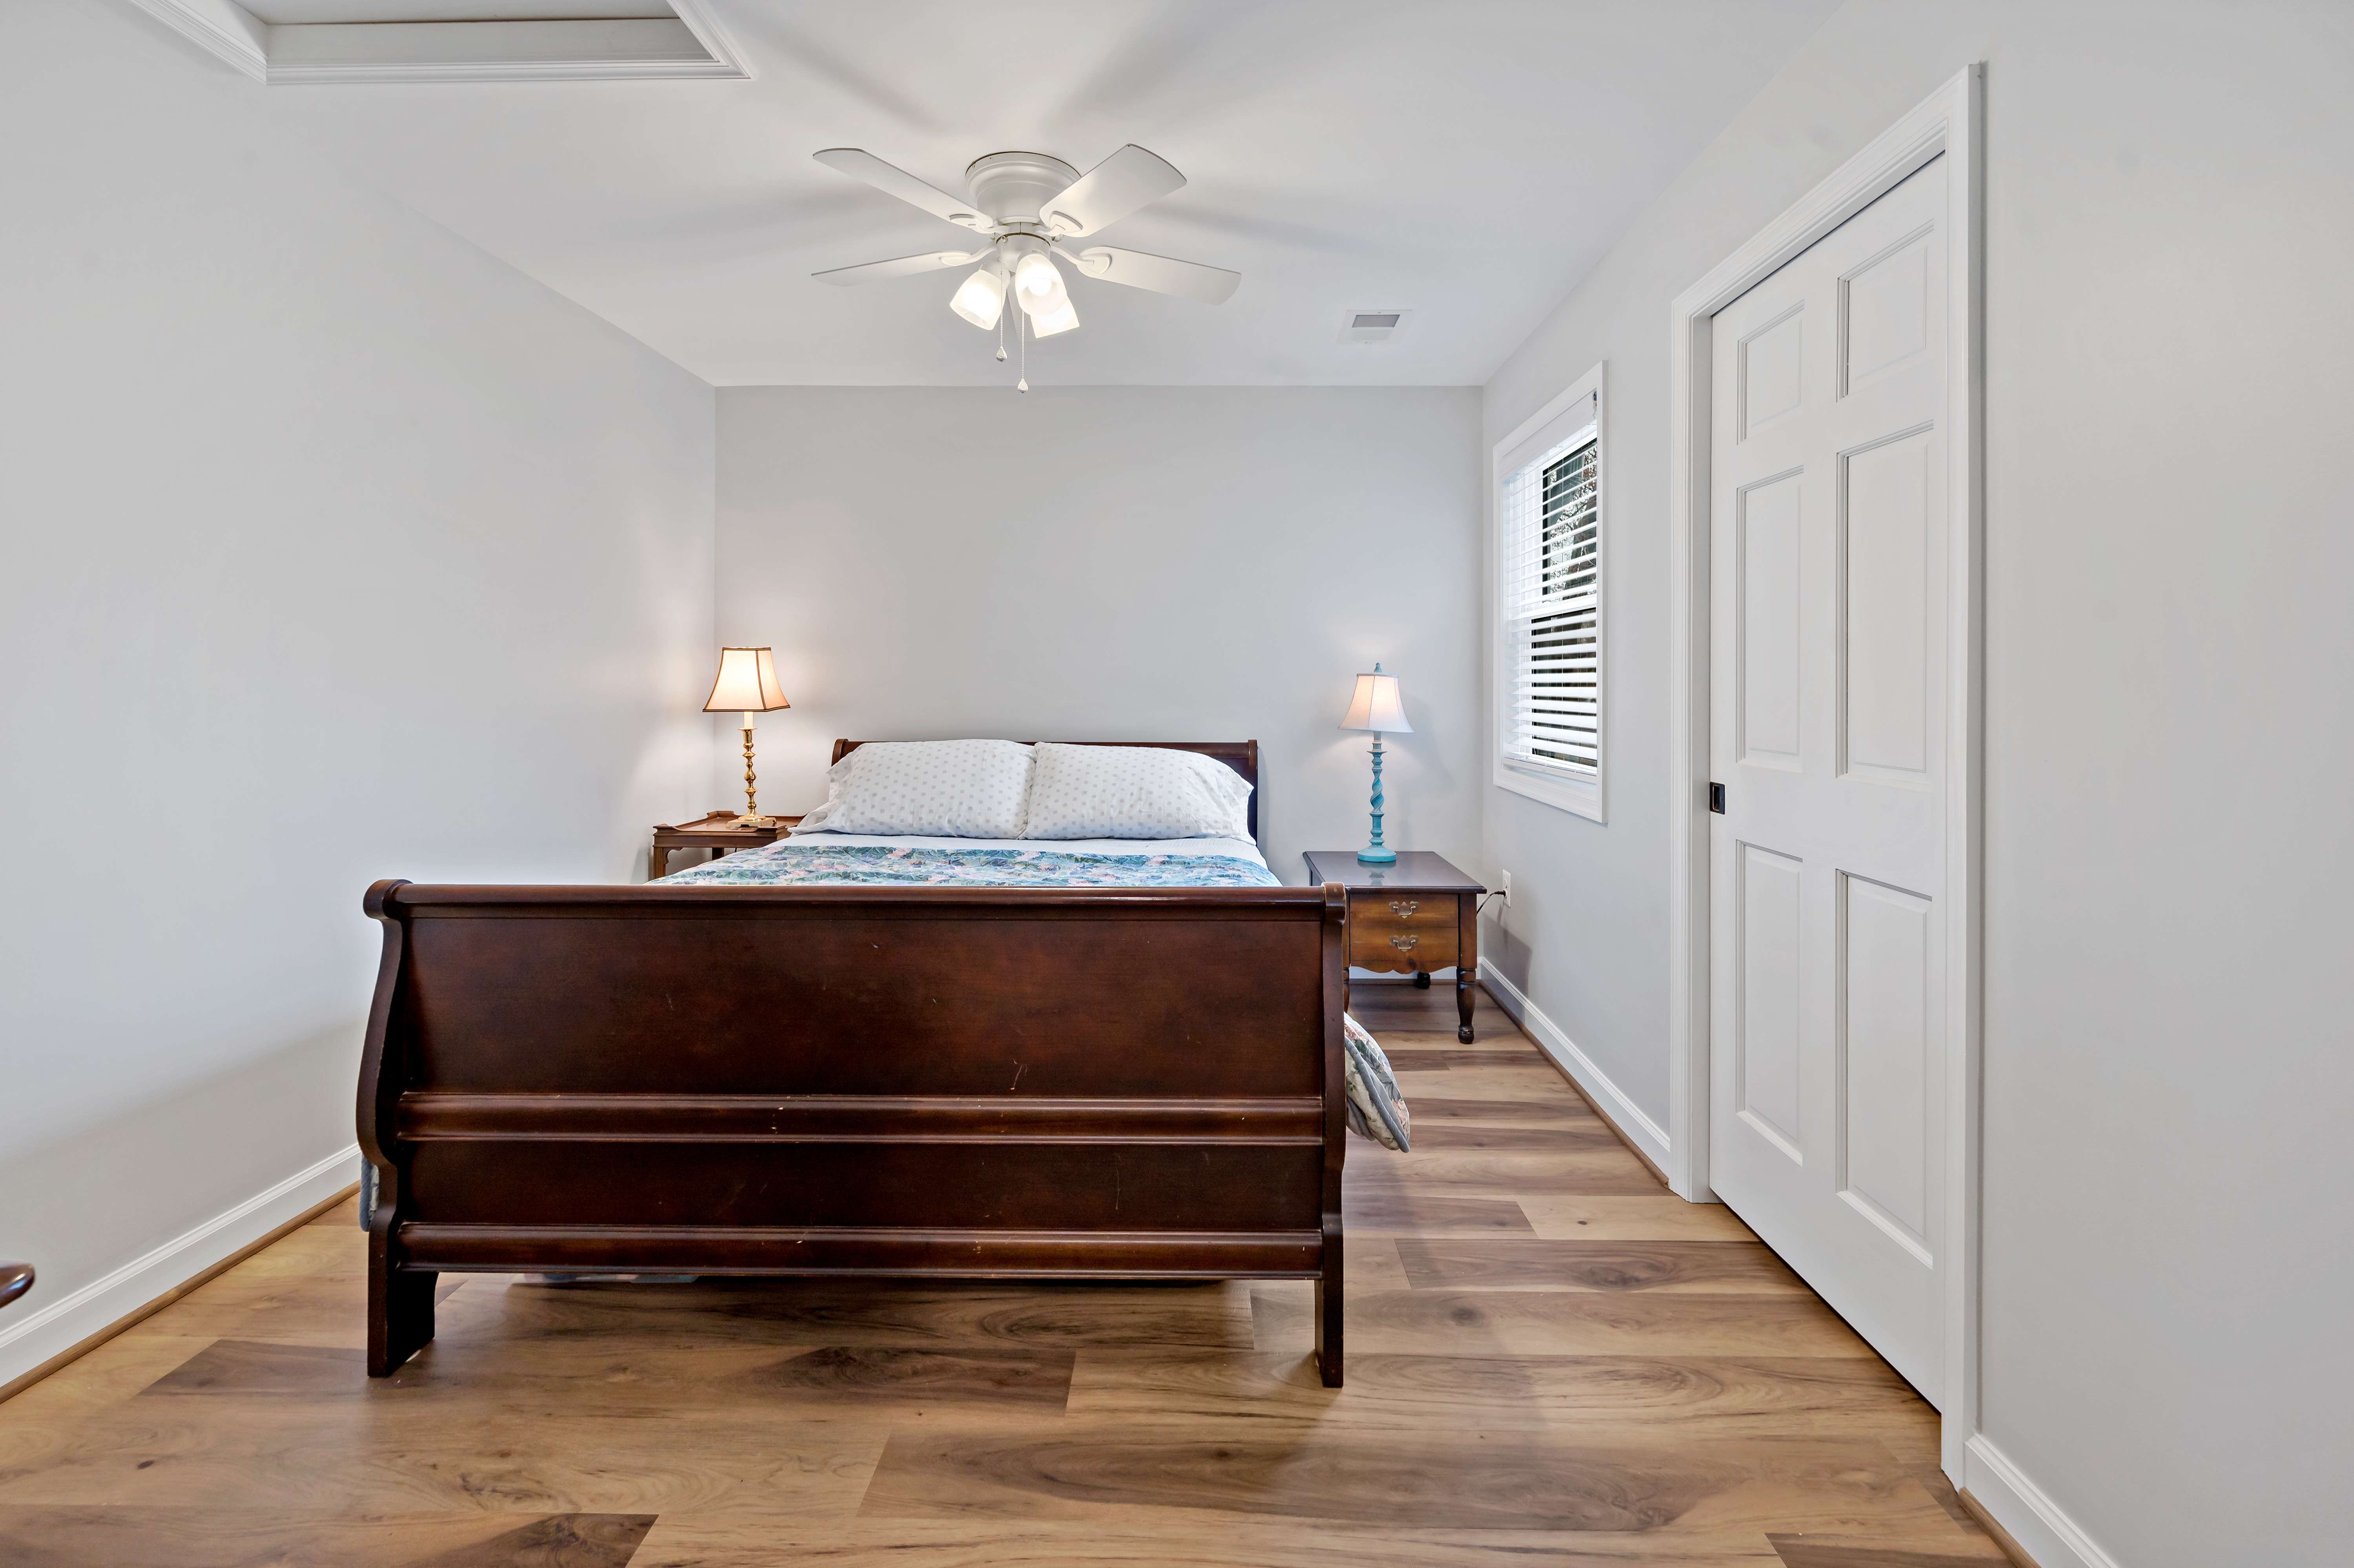 Small bedroom with hardwood floors and white ceiling fan